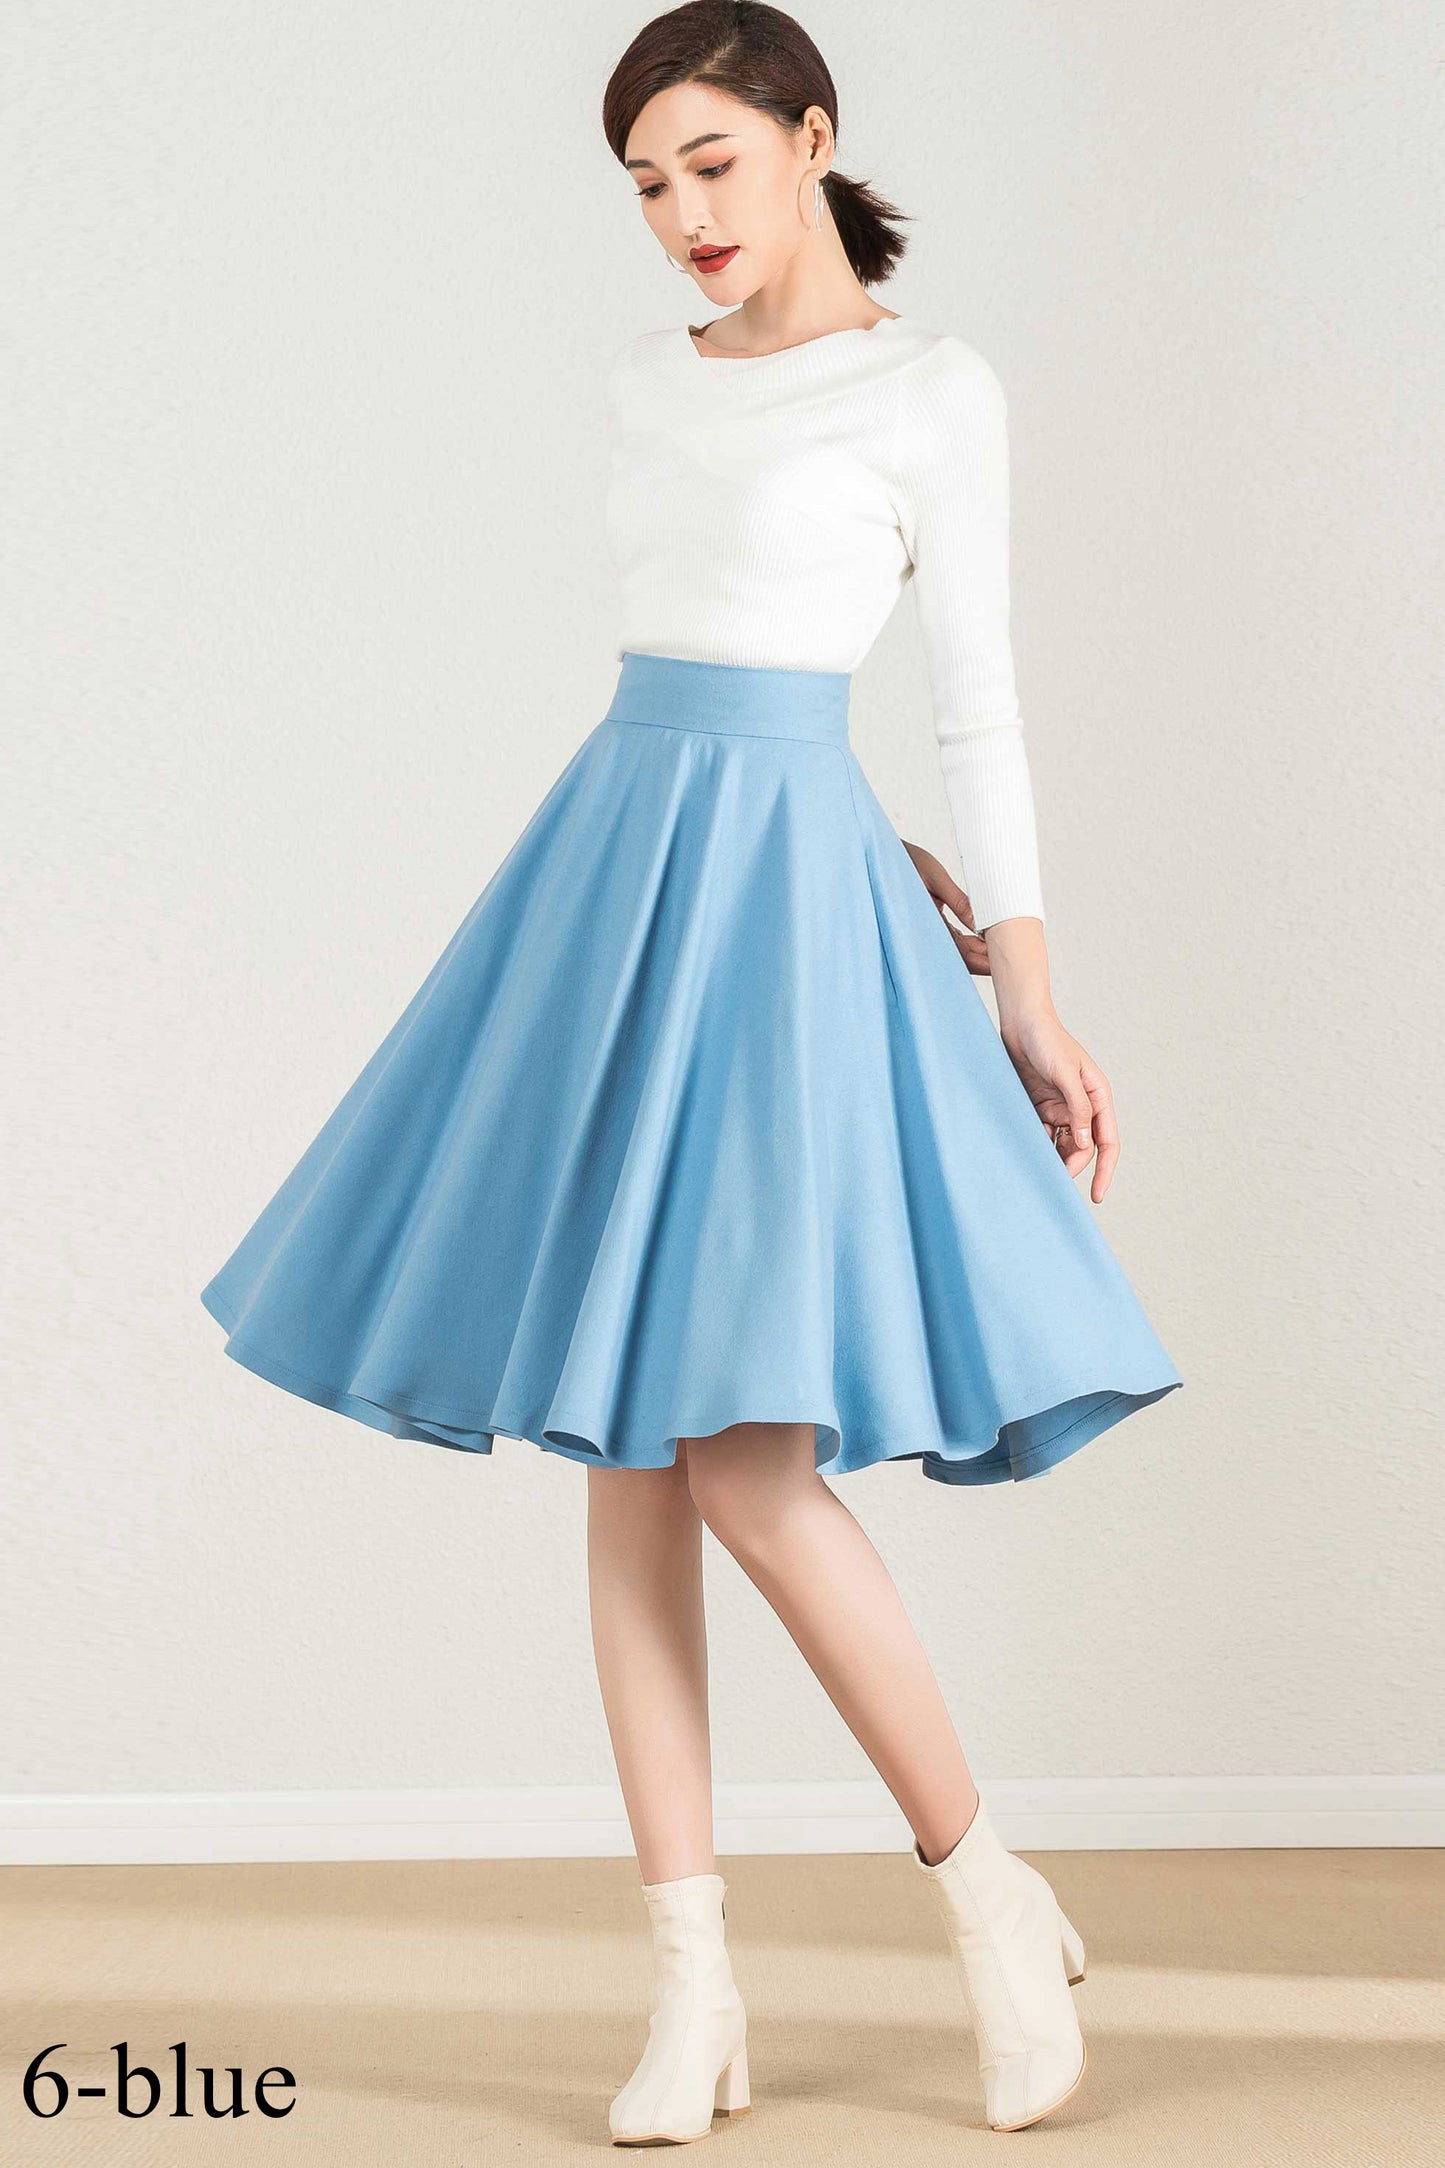 Hight waisted A line wool circle skirt for winter 1633#